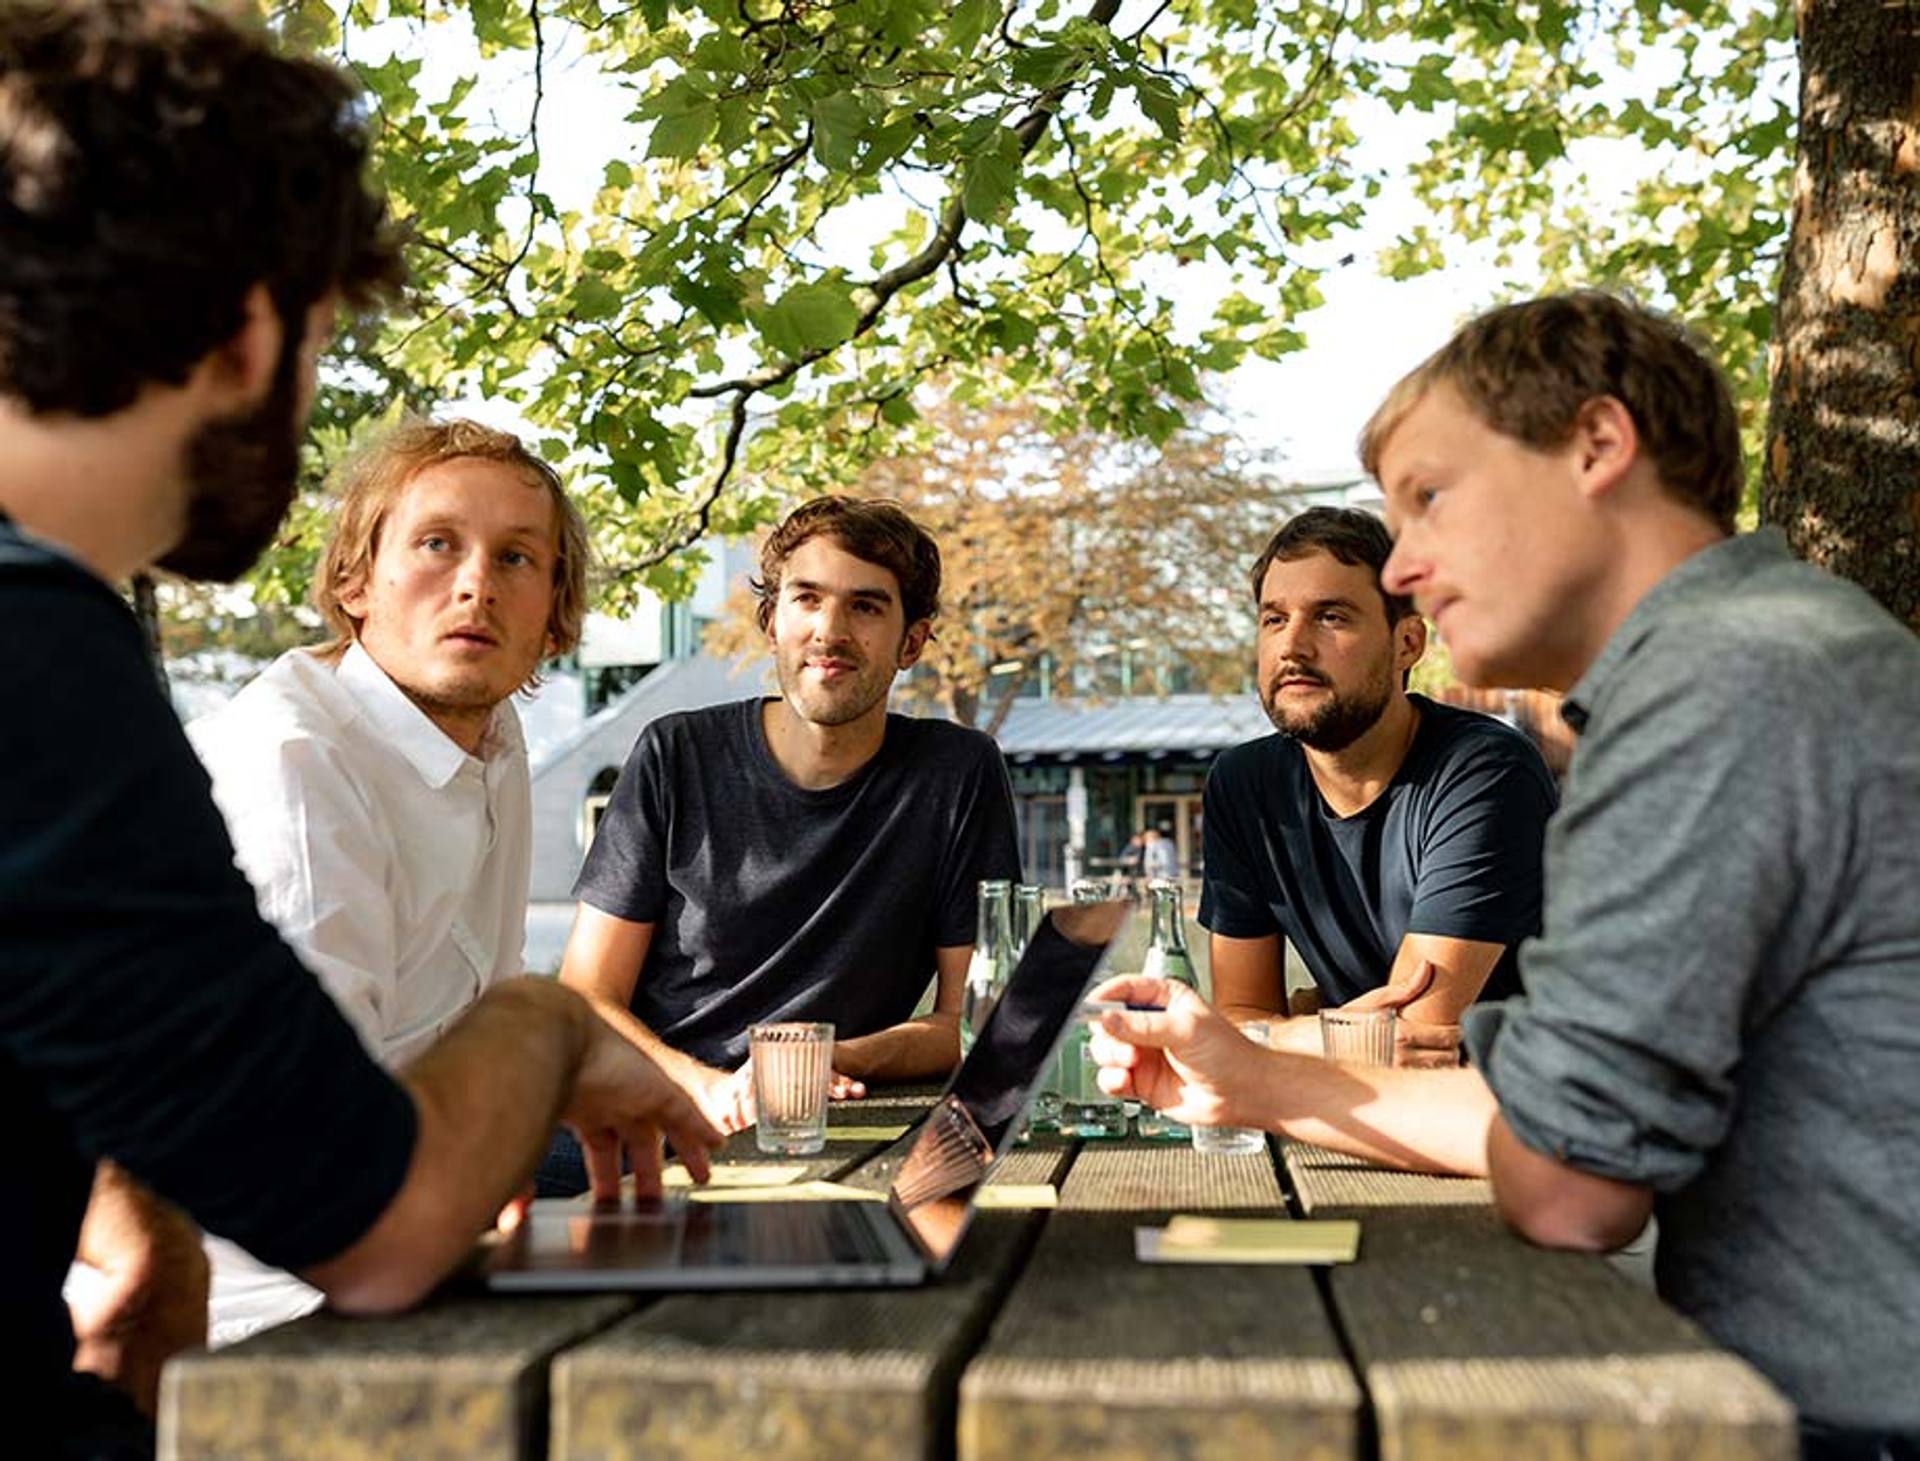 The founders of the Peerigon software company at a table under a tree